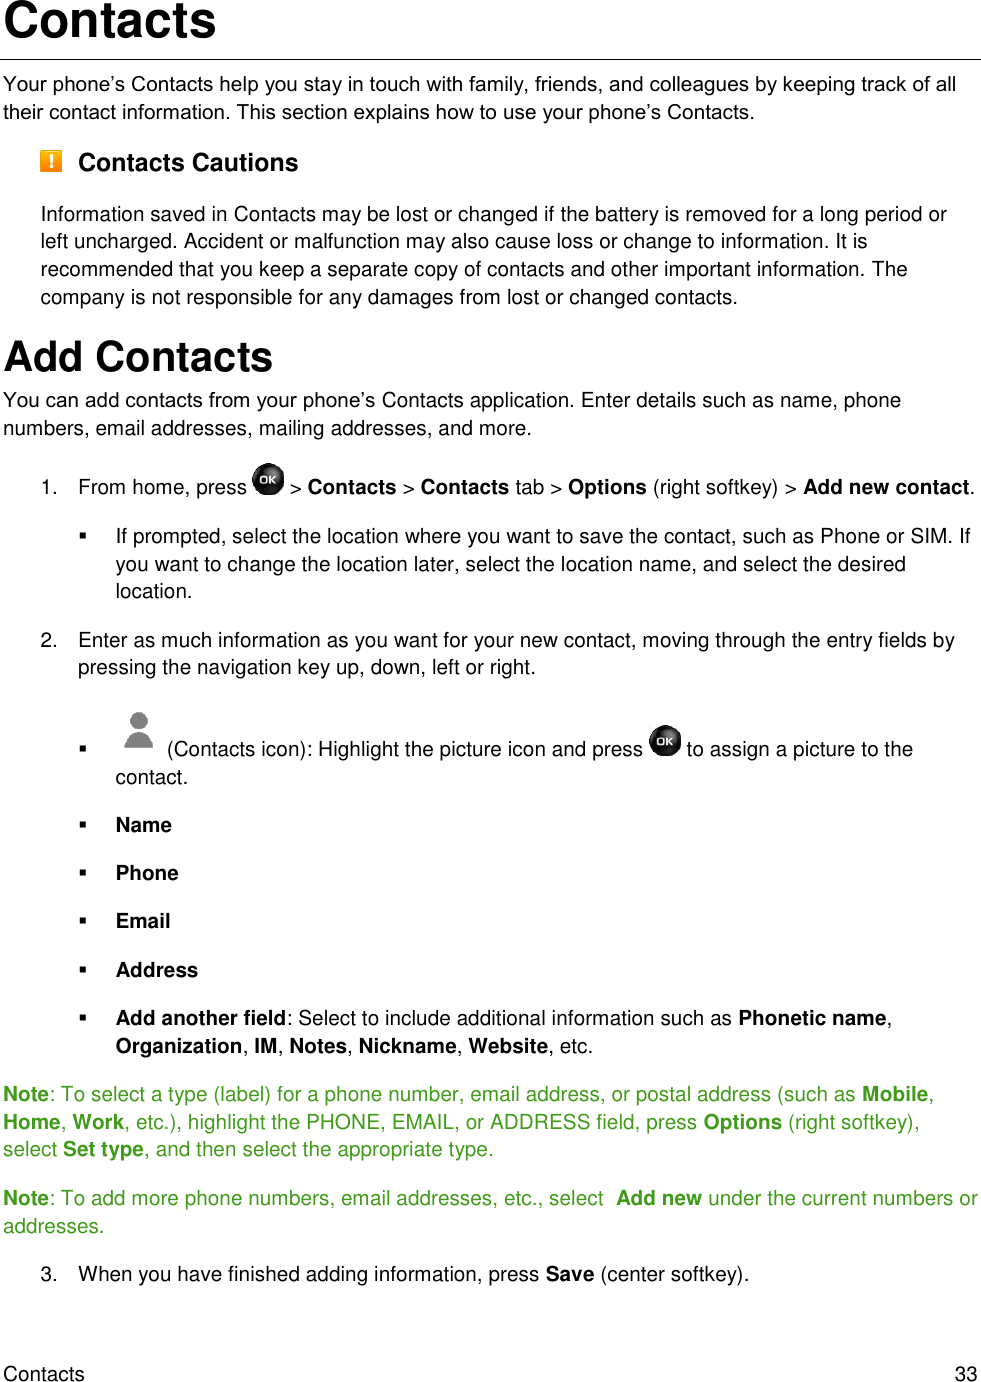 Contacts  33 Contacts Your phone’s Contacts help you stay in touch with family, friends, and colleagues by keeping track of all their contact information. This section explains how to use your phone’s Contacts.  Contacts Cautions Information saved in Contacts may be lost or changed if the battery is removed for a long period or left uncharged. Accident or malfunction may also cause loss or change to information. It is recommended that you keep a separate copy of contacts and other important information. The company is not responsible for any damages from lost or changed contacts. Add Contacts You can add contacts from your phone’s Contacts application. Enter details such as name, phone numbers, email addresses, mailing addresses, and more. 1.  From home, press   &gt; Contacts &gt; Contacts tab &gt; Options (right softkey) &gt; Add new contact.   If prompted, select the location where you want to save the contact, such as Phone or SIM. If you want to change the location later, select the location name, and select the desired location. 2.  Enter as much information as you want for your new contact, moving through the entry fields by pressing the navigation key up, down, left or right.    (Contacts icon): Highlight the picture icon and press   to assign a picture to the contact.  Name  Phone  Email  Address  Add another field: Select to include additional information such as Phonetic name, Organization, IM, Notes, Nickname, Website, etc. Note: To select a type (label) for a phone number, email address, or postal address (such as Mobile, Home, Work, etc.), highlight the PHONE, EMAIL, or ADDRESS field, press Options (right softkey), select Set type, and then select the appropriate type. Note: To add more phone numbers, email addresses, etc., select  Add new under the current numbers or addresses. 3.  When you have finished adding information, press Save (center softkey). 